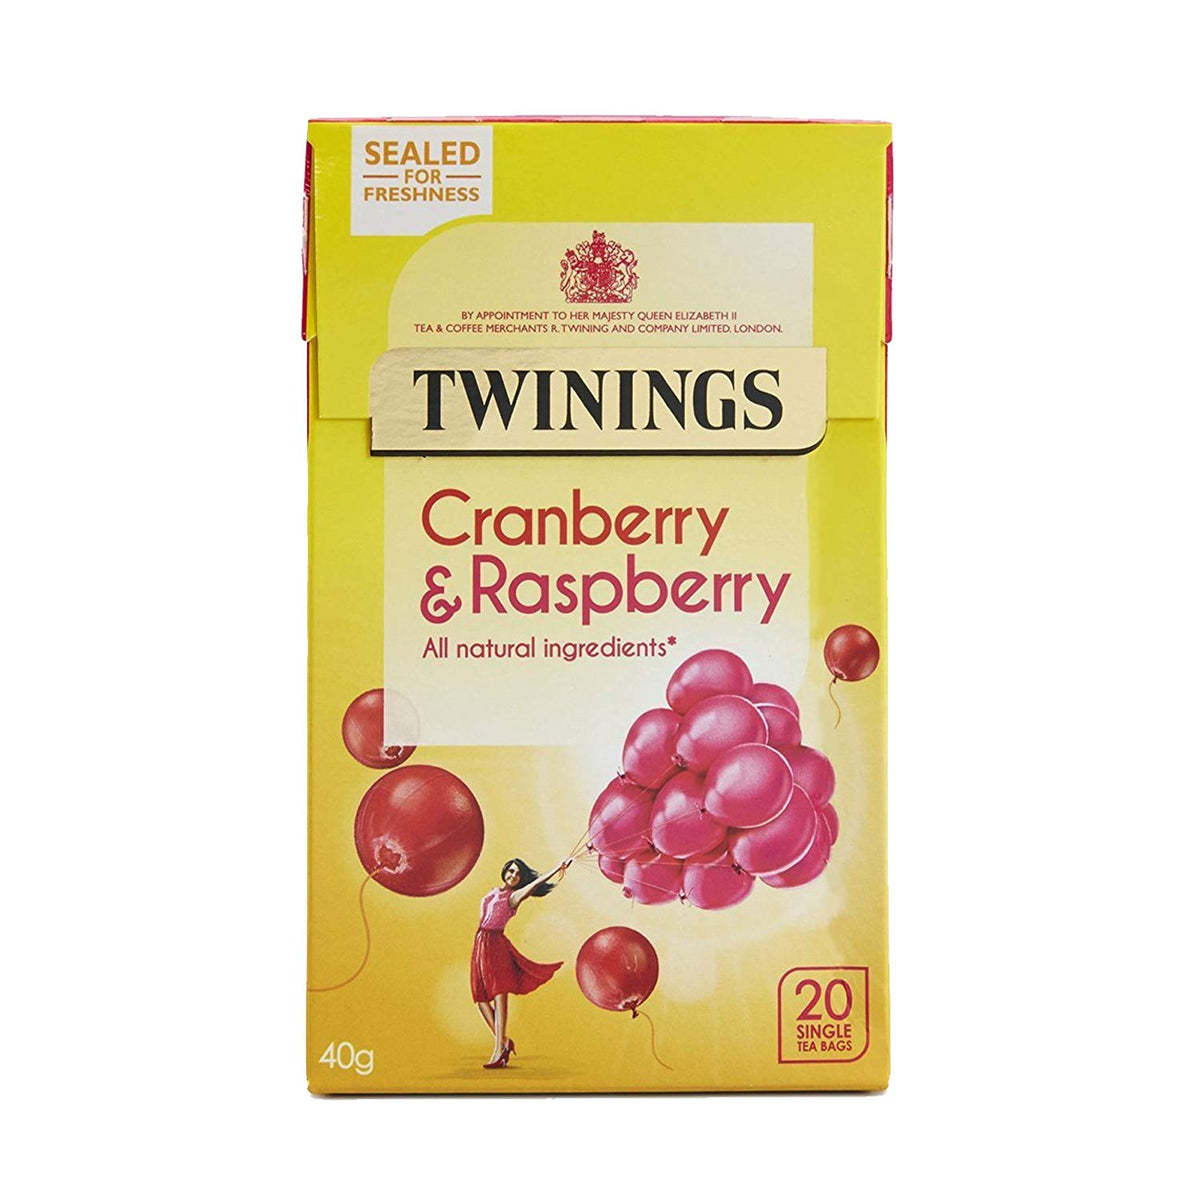 Twinings Cranberry & Raspberry 20 Teabags (40g) Twinings